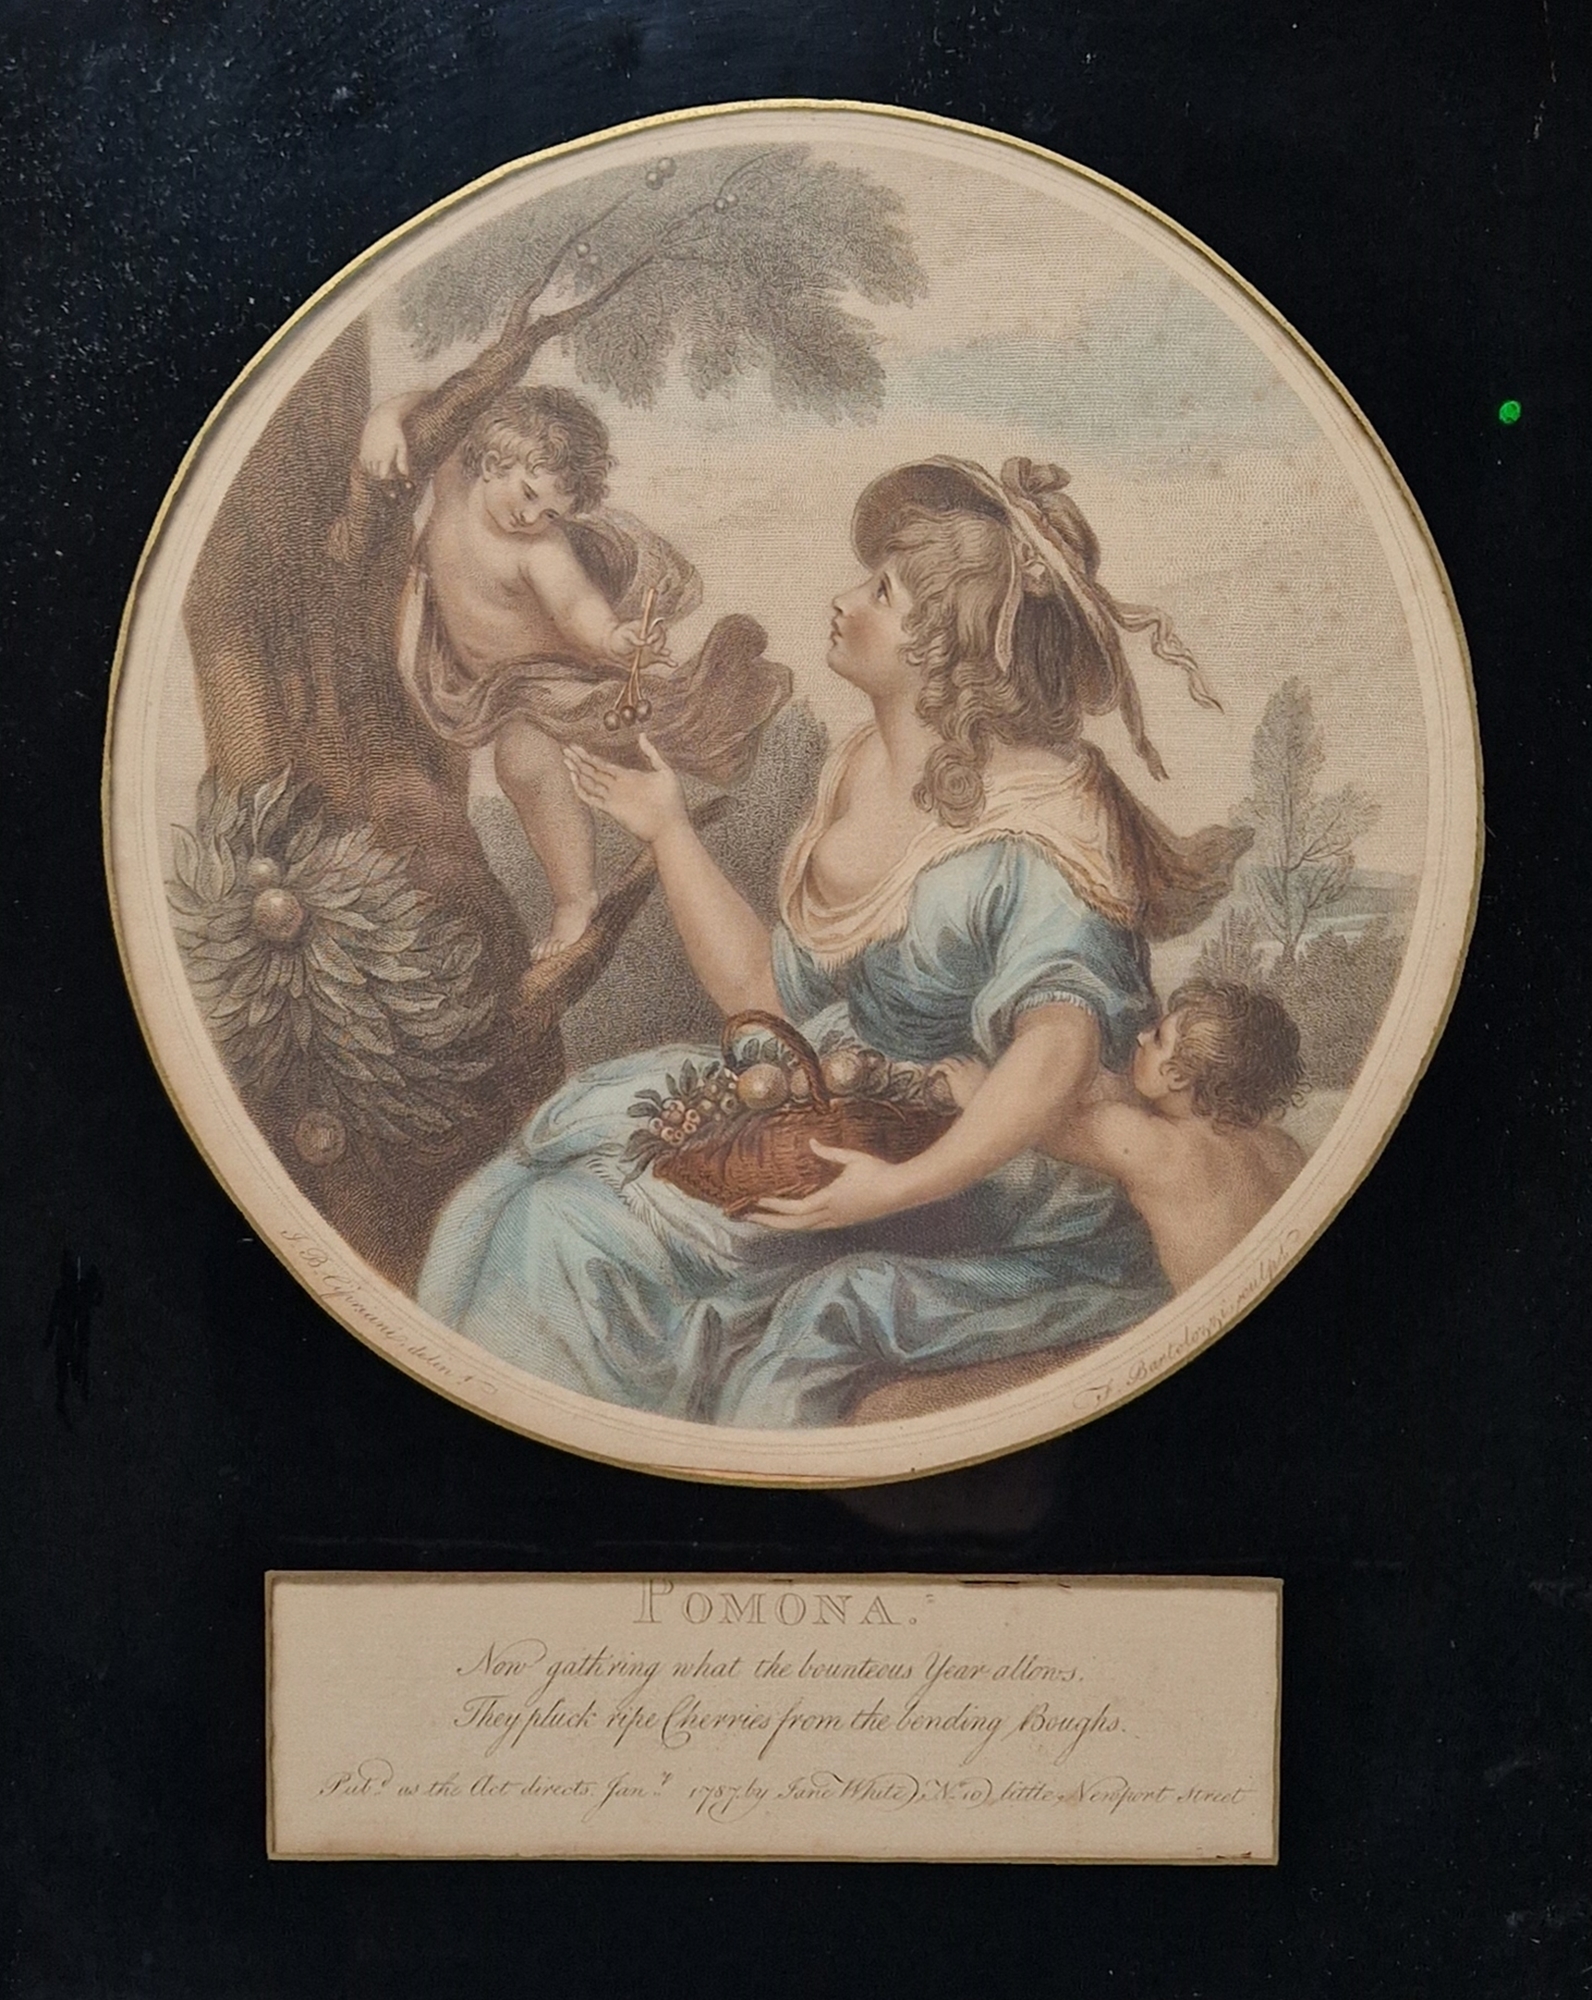 Francesco Bartolozzi after Cipriani Two 19th century hand coloured engravings of Ceres and Pomona, - Image 2 of 3